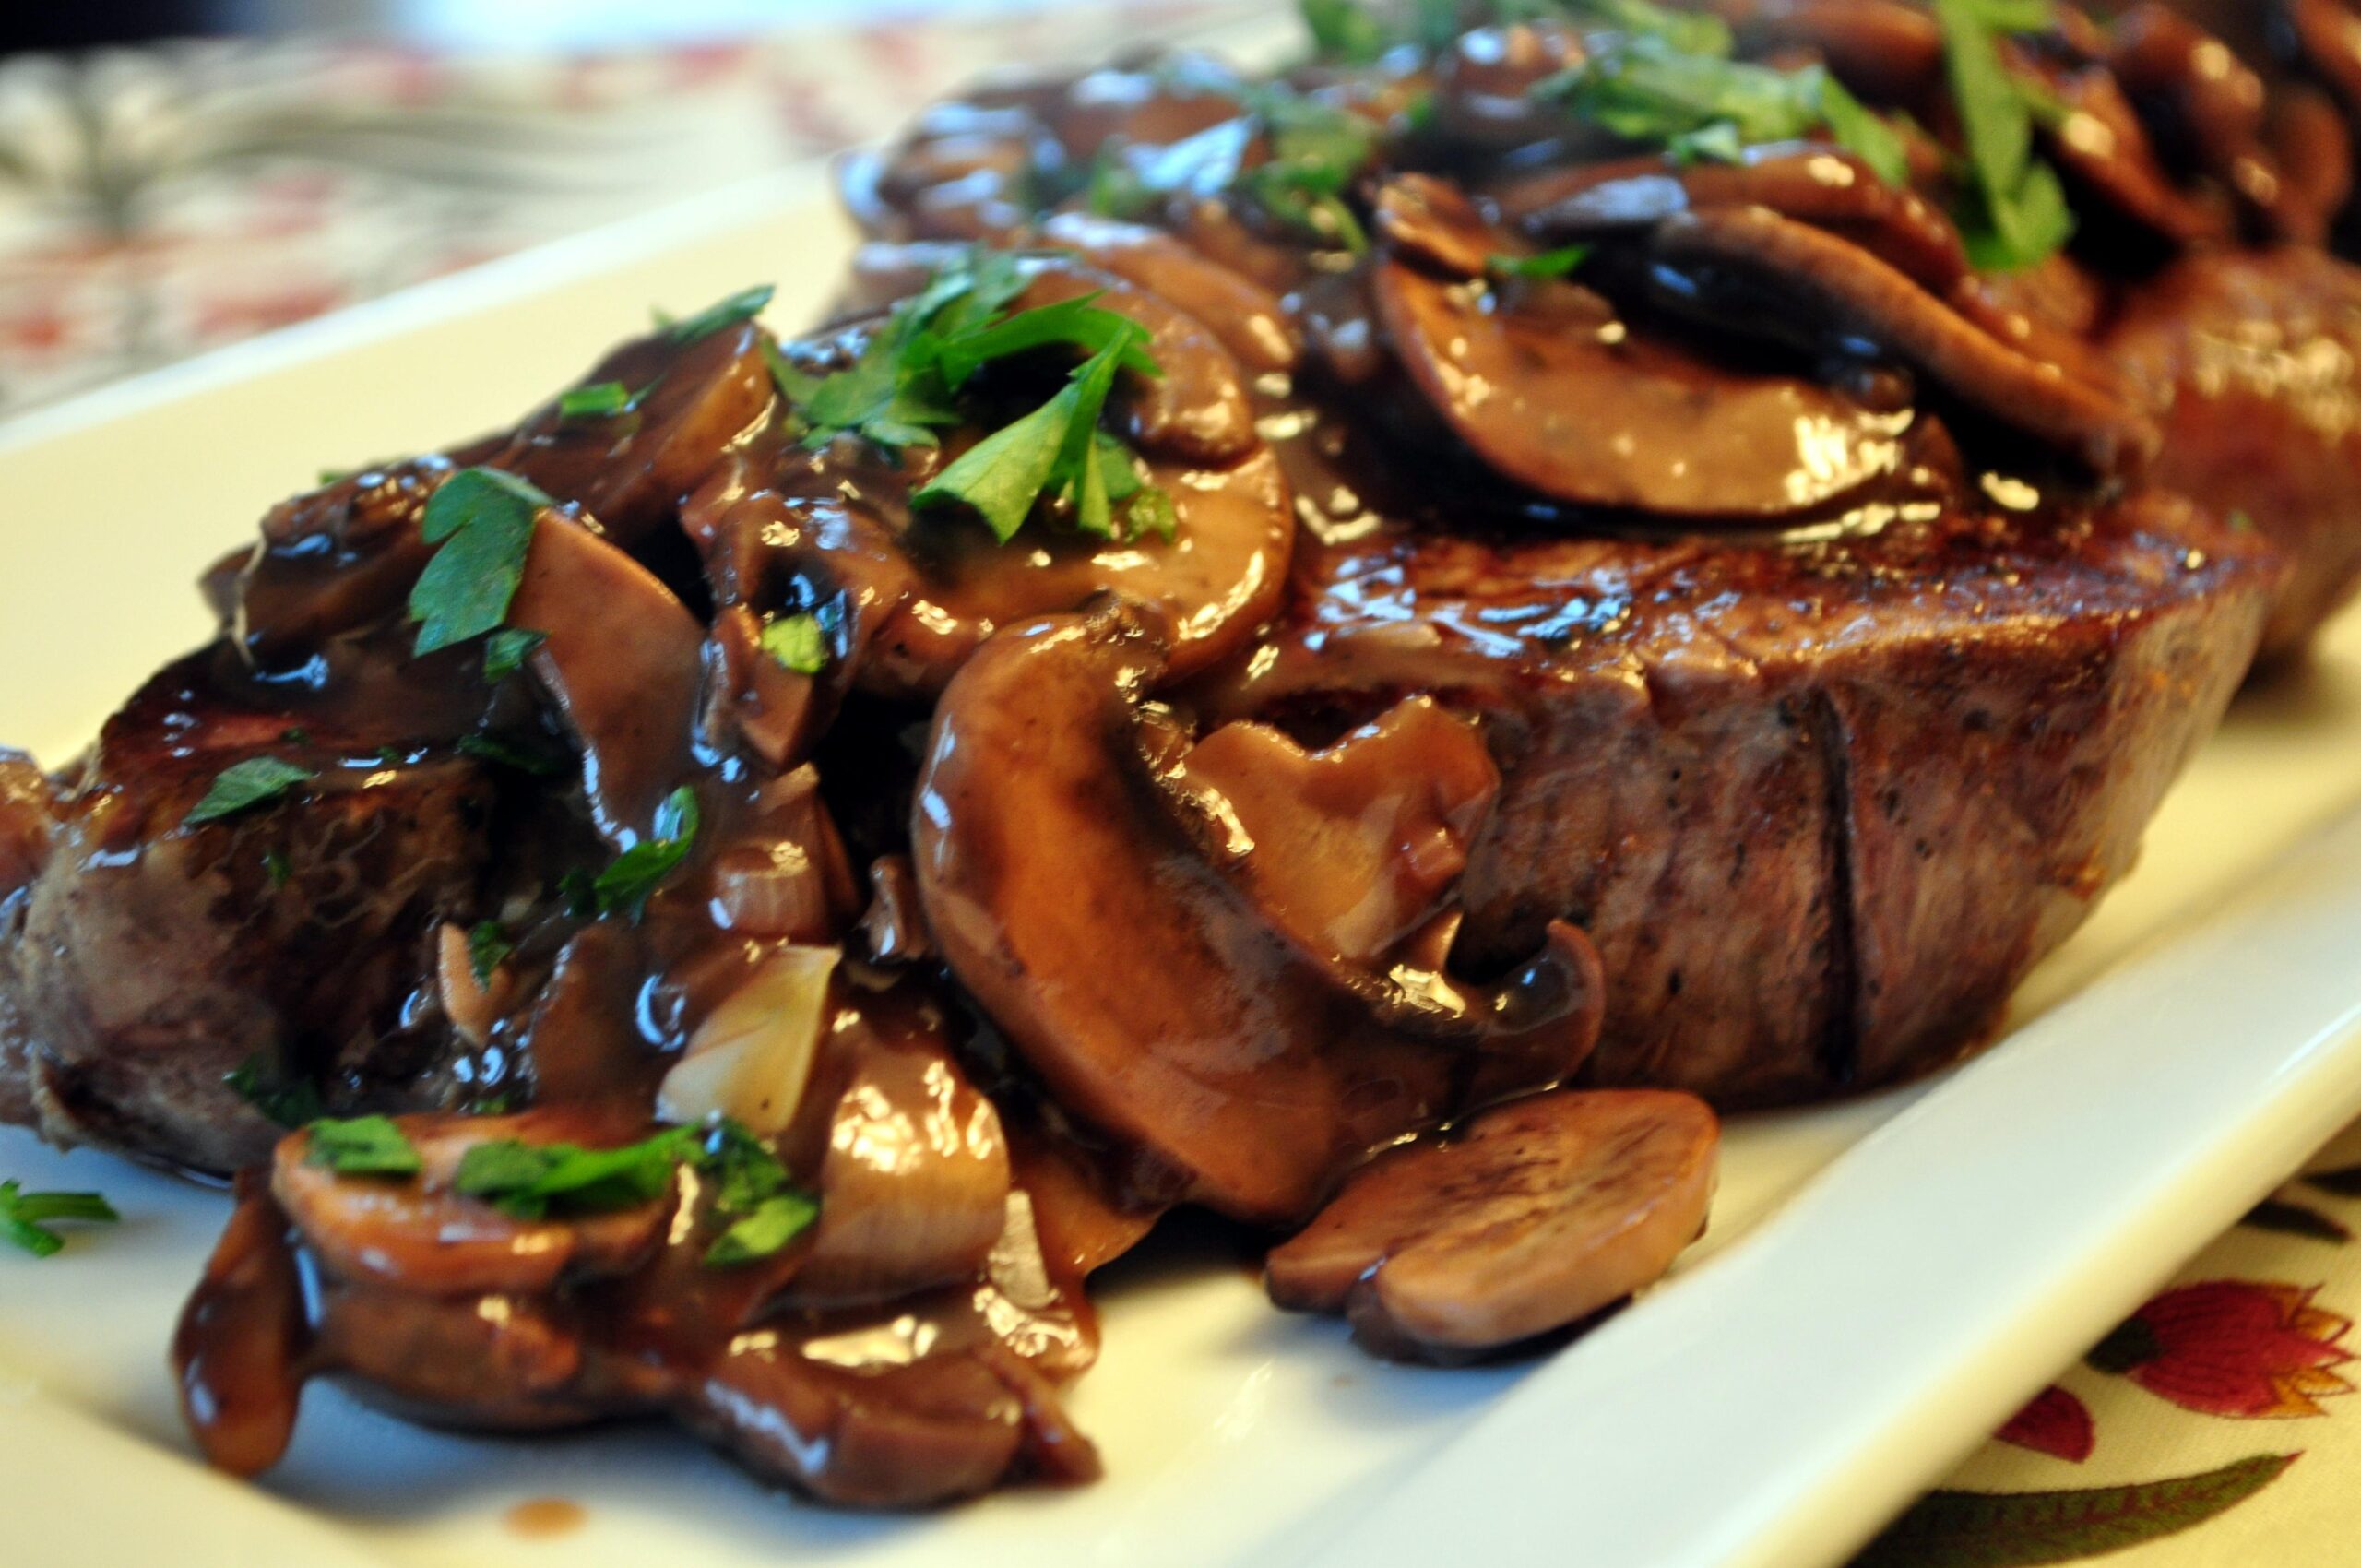  I refuse to apologize for this delicious and tender beef with a mushroom and onion gravy you'll fall in love with.